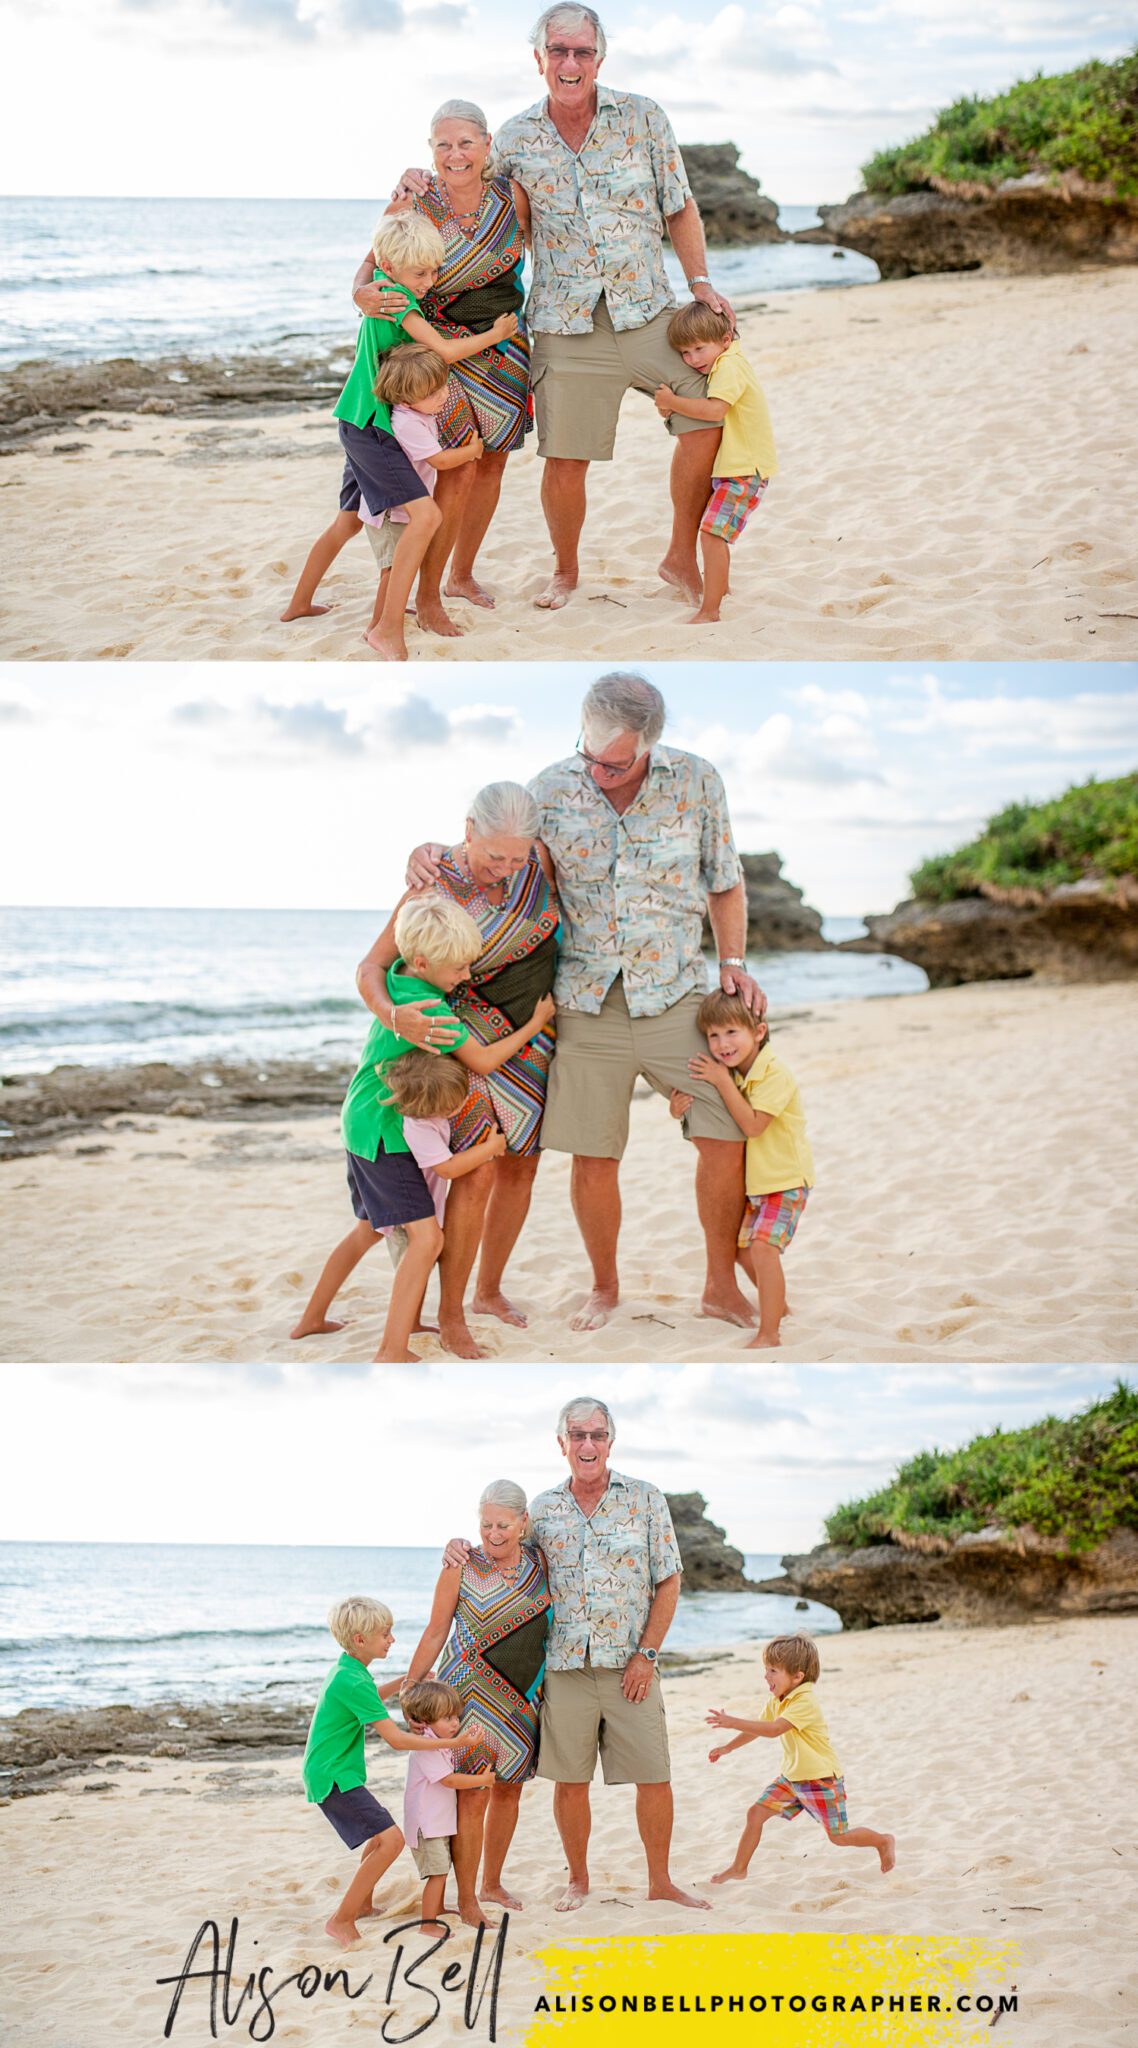 Family Photographers in Honolulu Hawaii. An extended family session by Alison Bell, Photographer